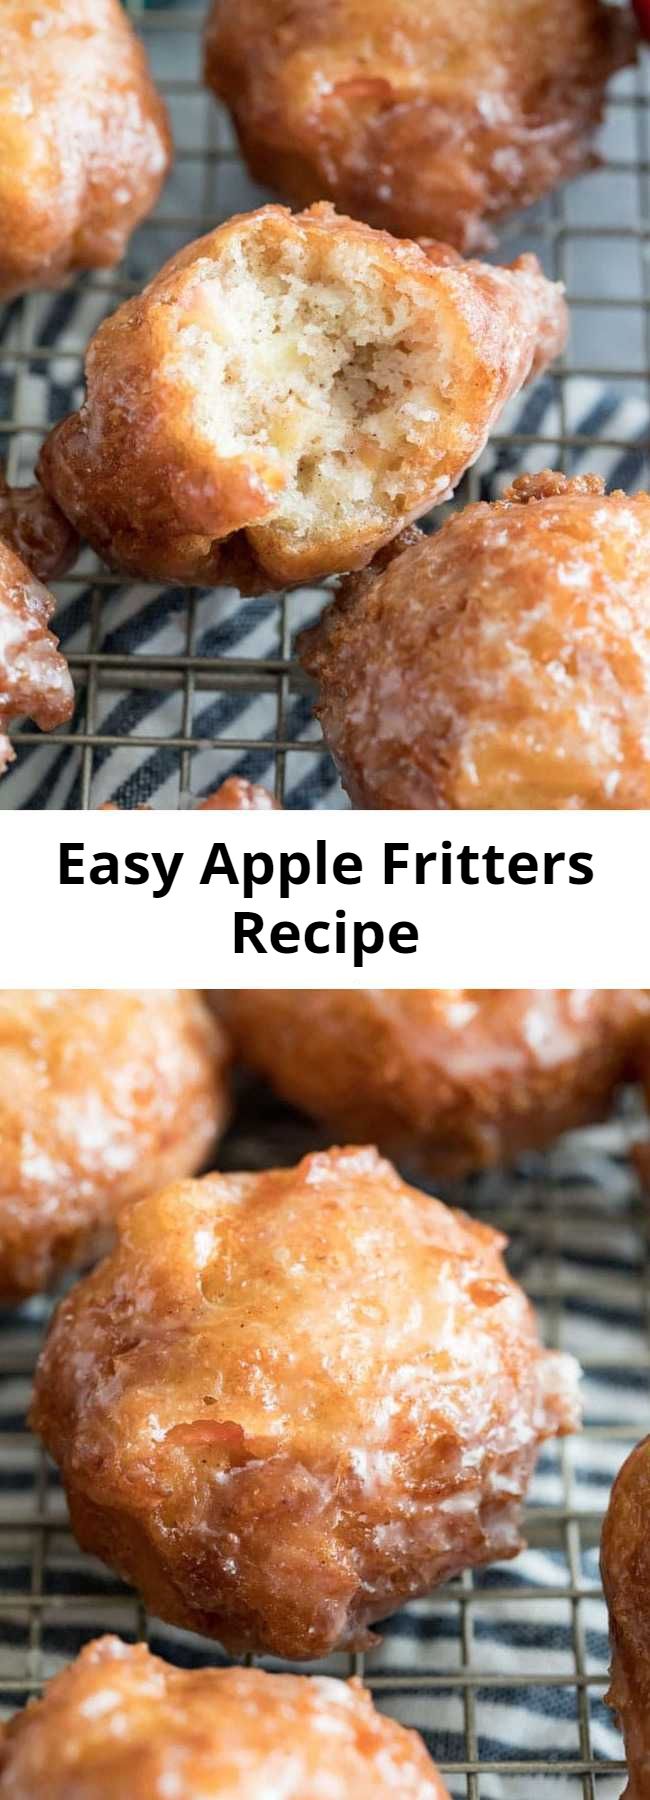 Easy Apple Fritters Recipe - Apple fritters are somewhat sweet, tender, and fluffy, and are absolutely packed with flavor. Dip them in a 3 ingredient apple cider glaze or roll them in cinnamon/sugar and enjoy! Have you ever made fried apple fritters before? Don’t be intimidated because this recipe is so simple to make at home, it require absolutely no yeast or rising!